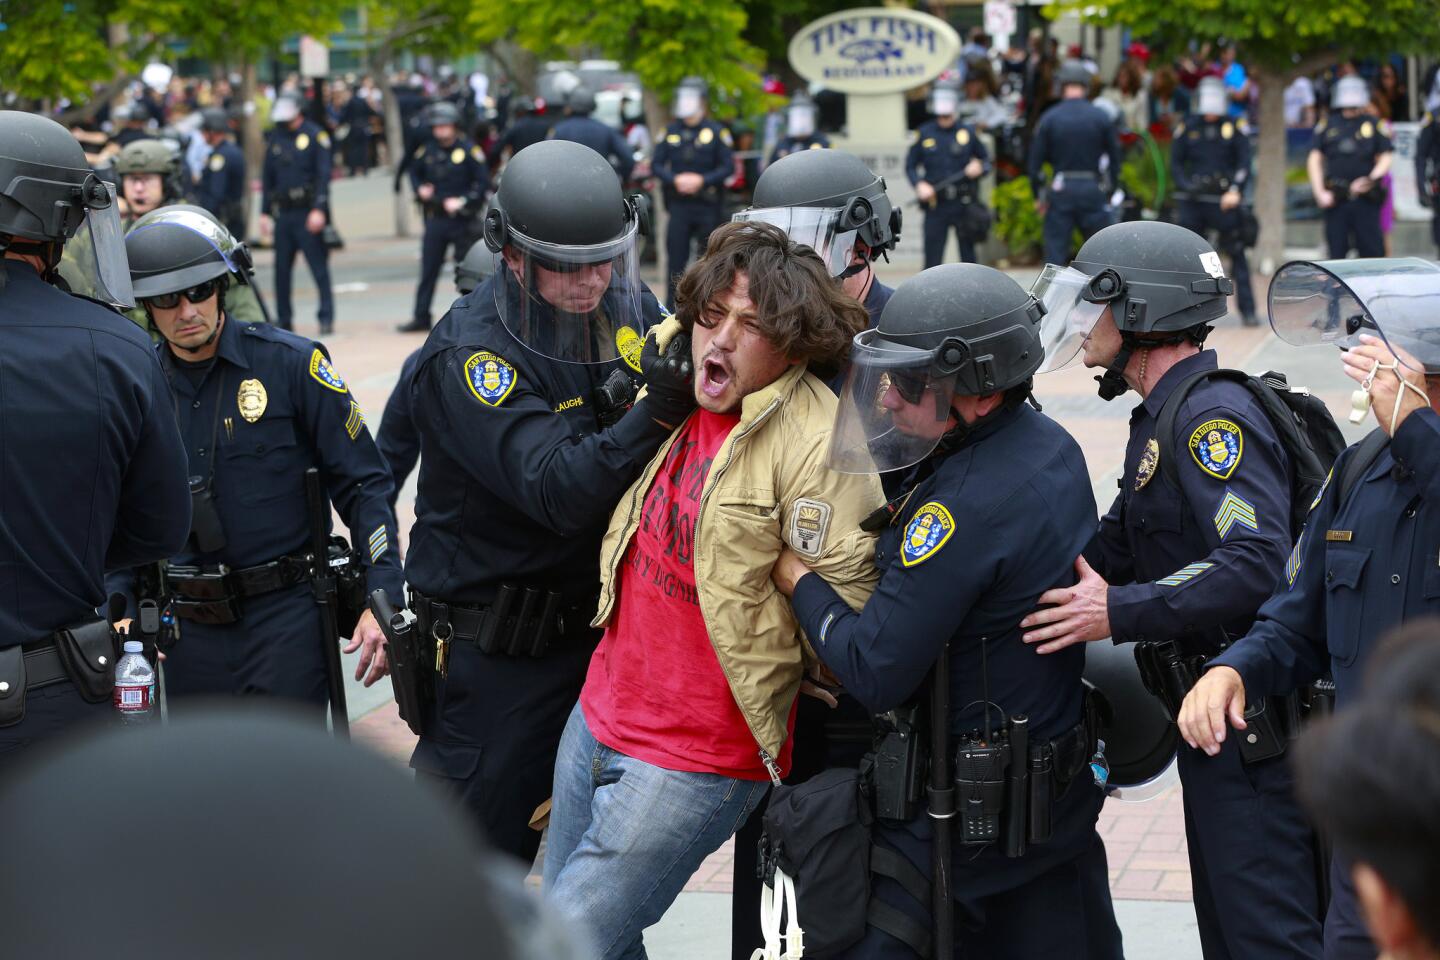 A protester who refused to comply with San Diego police officers in the Gaslamp Quarter was taken into custody on Friday.